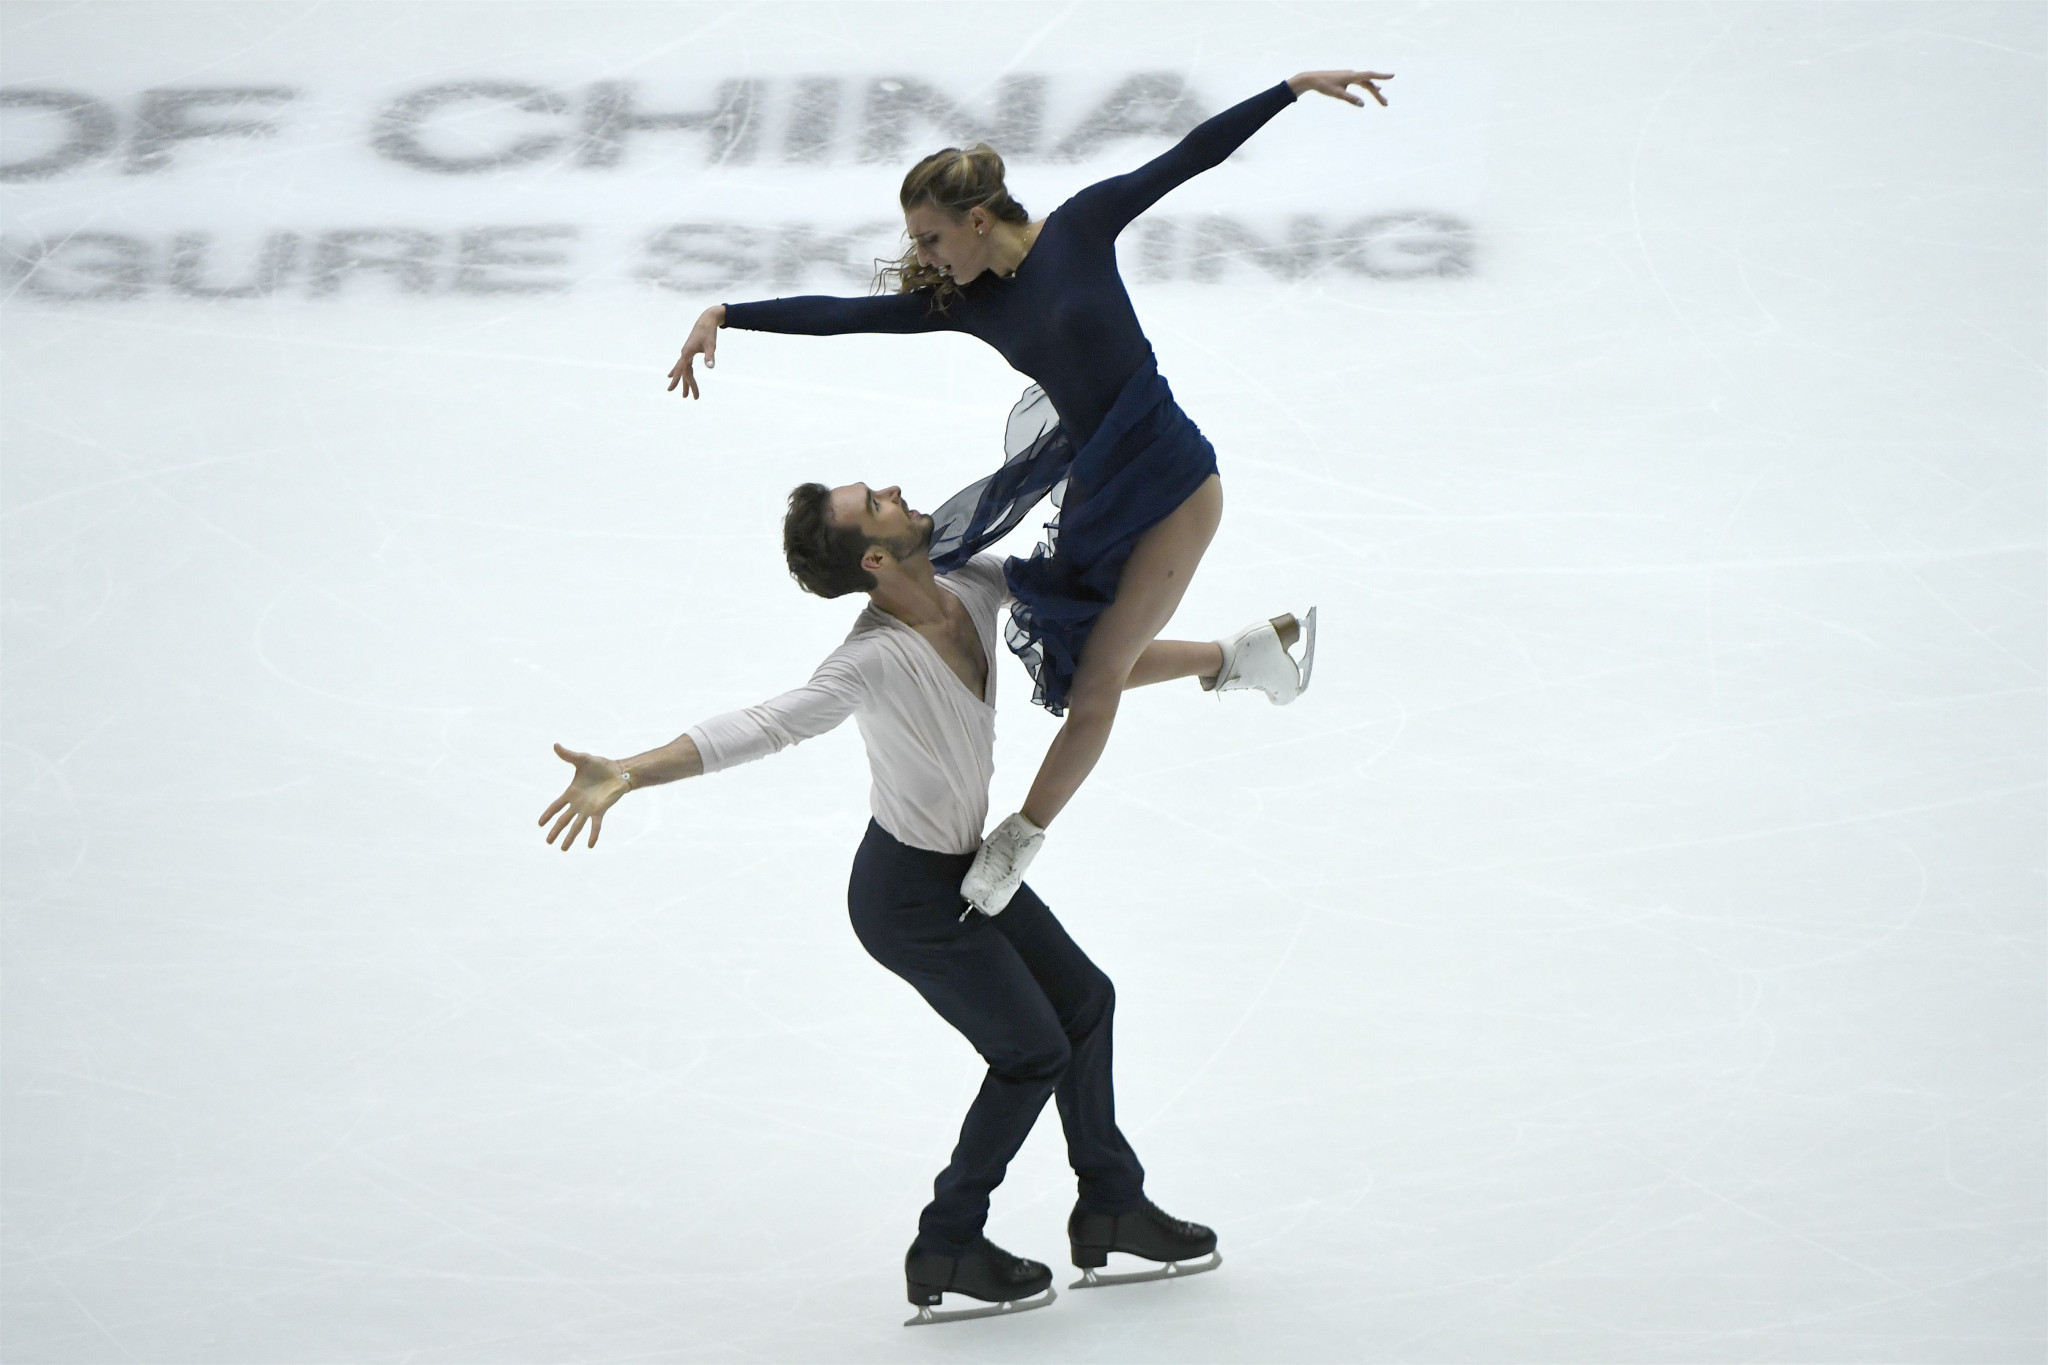 French duo Gabriella Papadakis and Guillaume Cizeron are among the athletes aiming to book their place in the International Skating Union Grand Prix of Figure Skating Final ©Getty Images